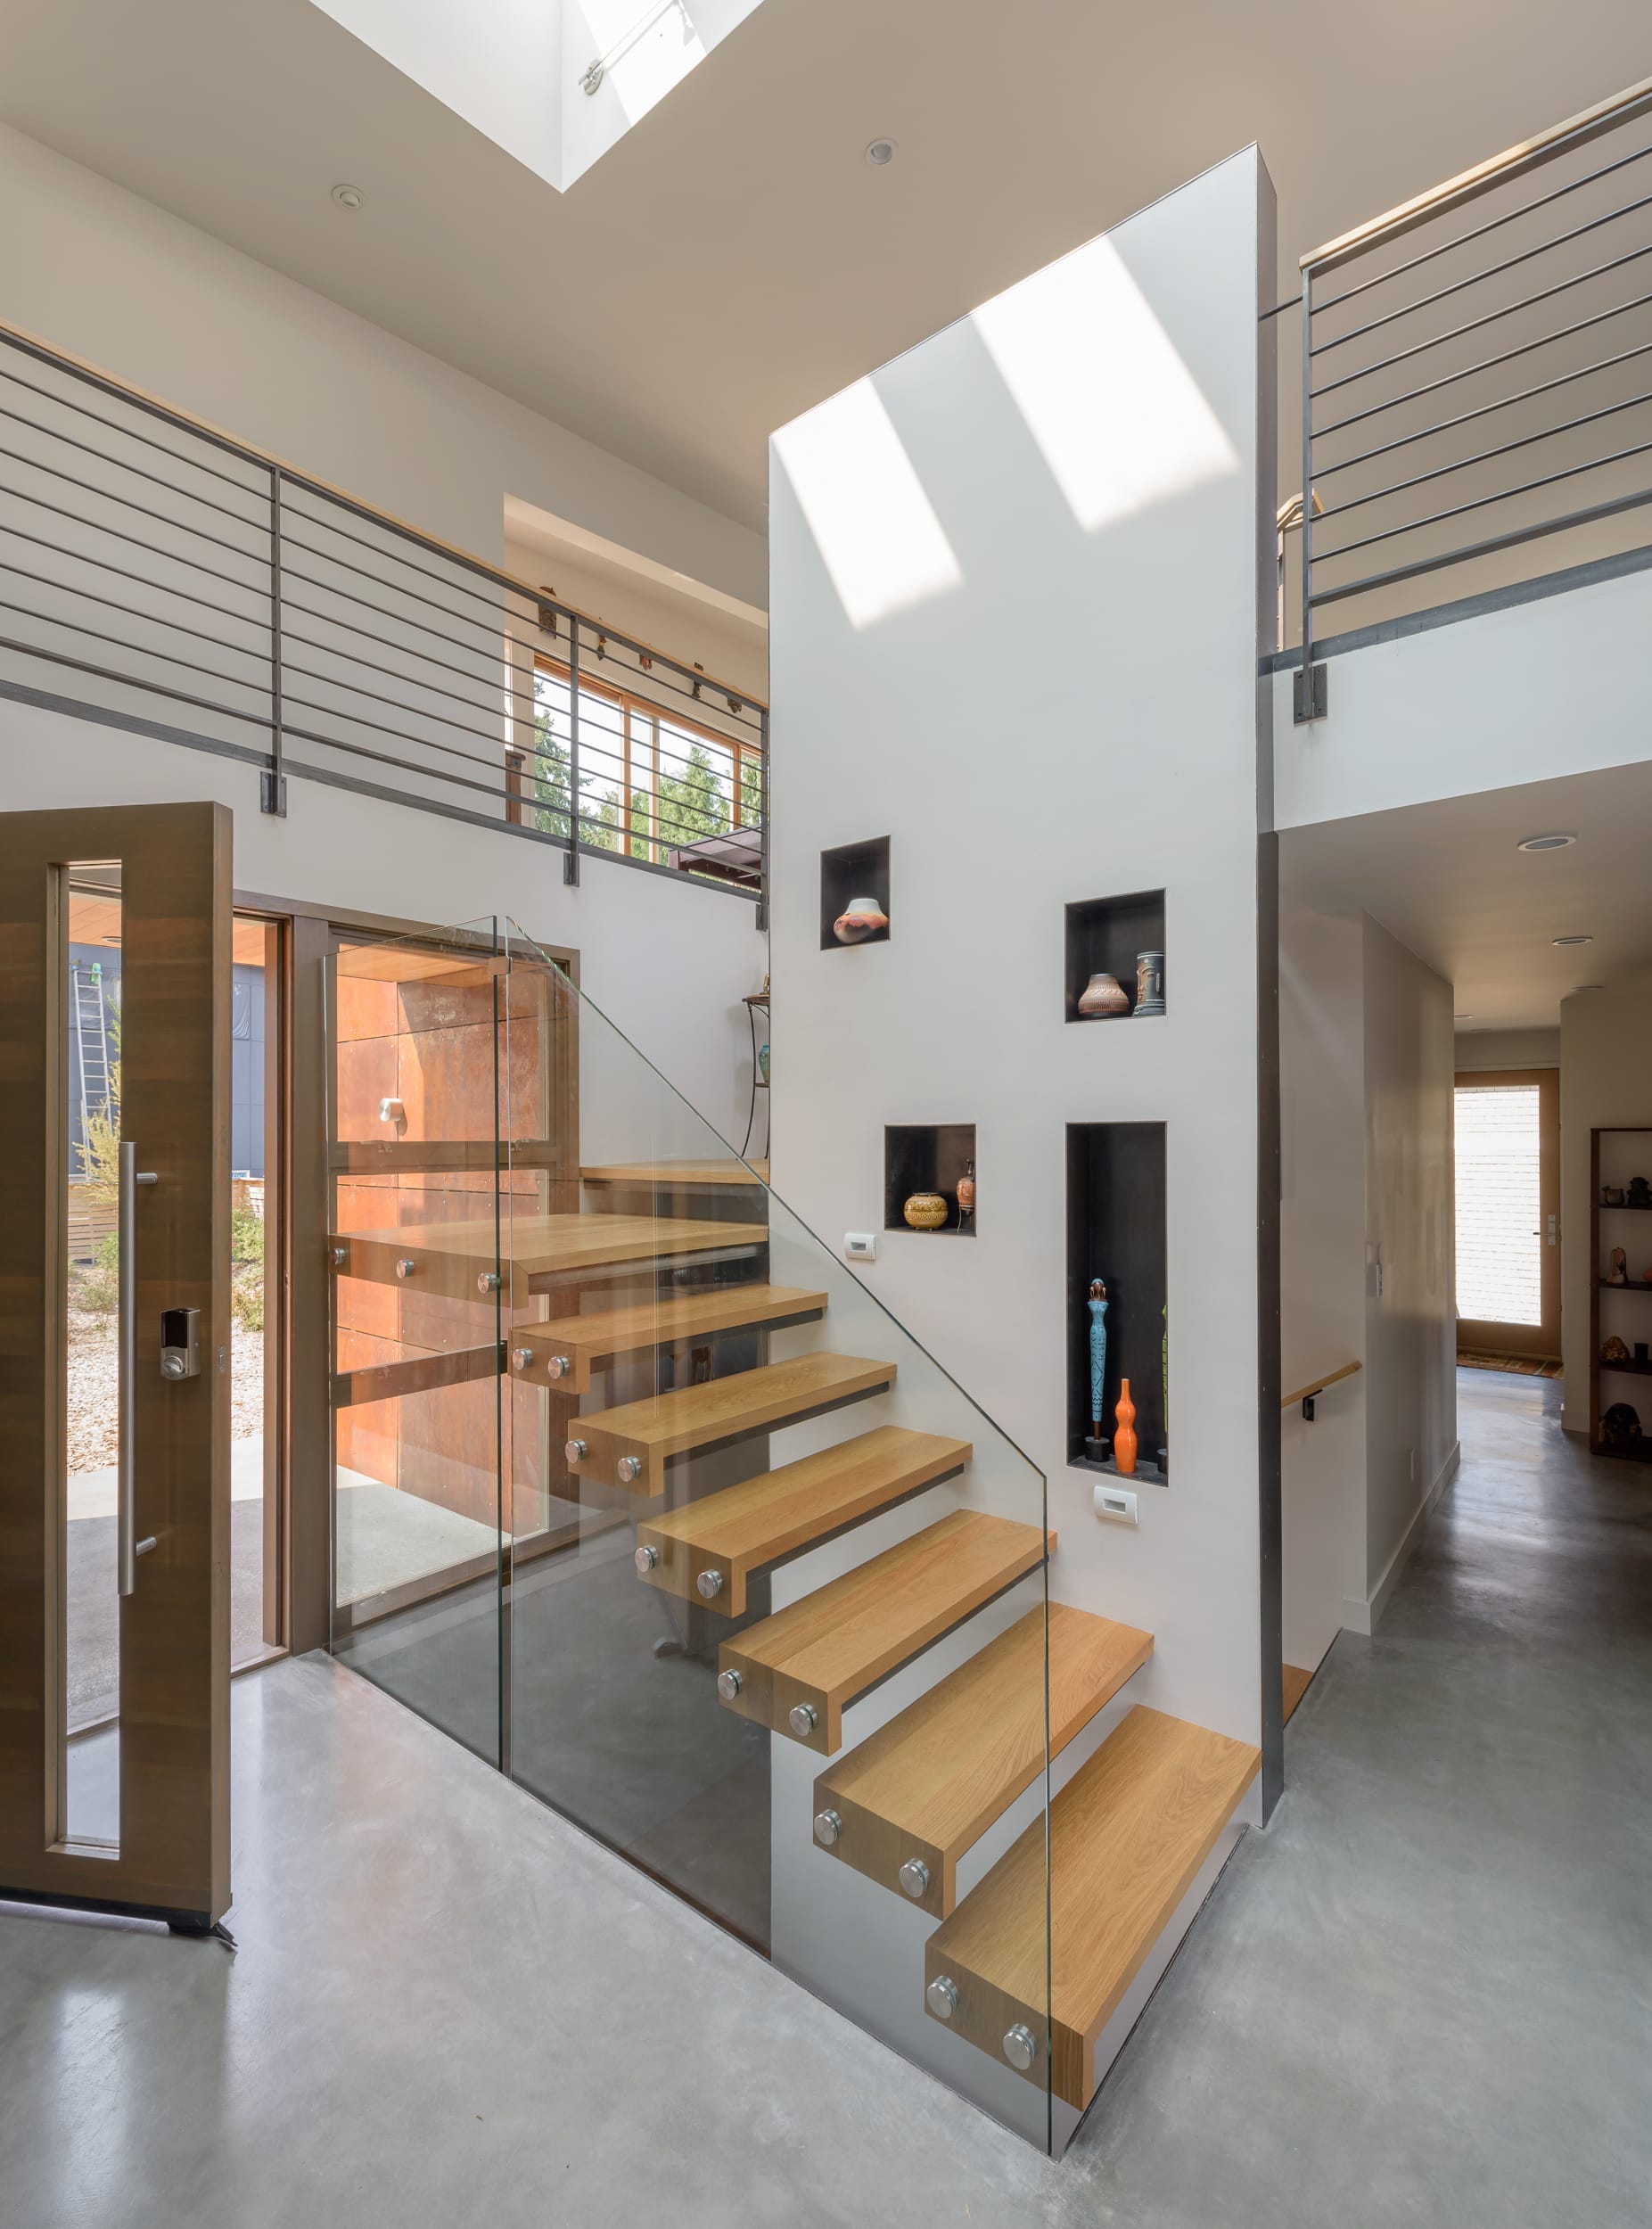 A modern staircase in a house with glass railings.